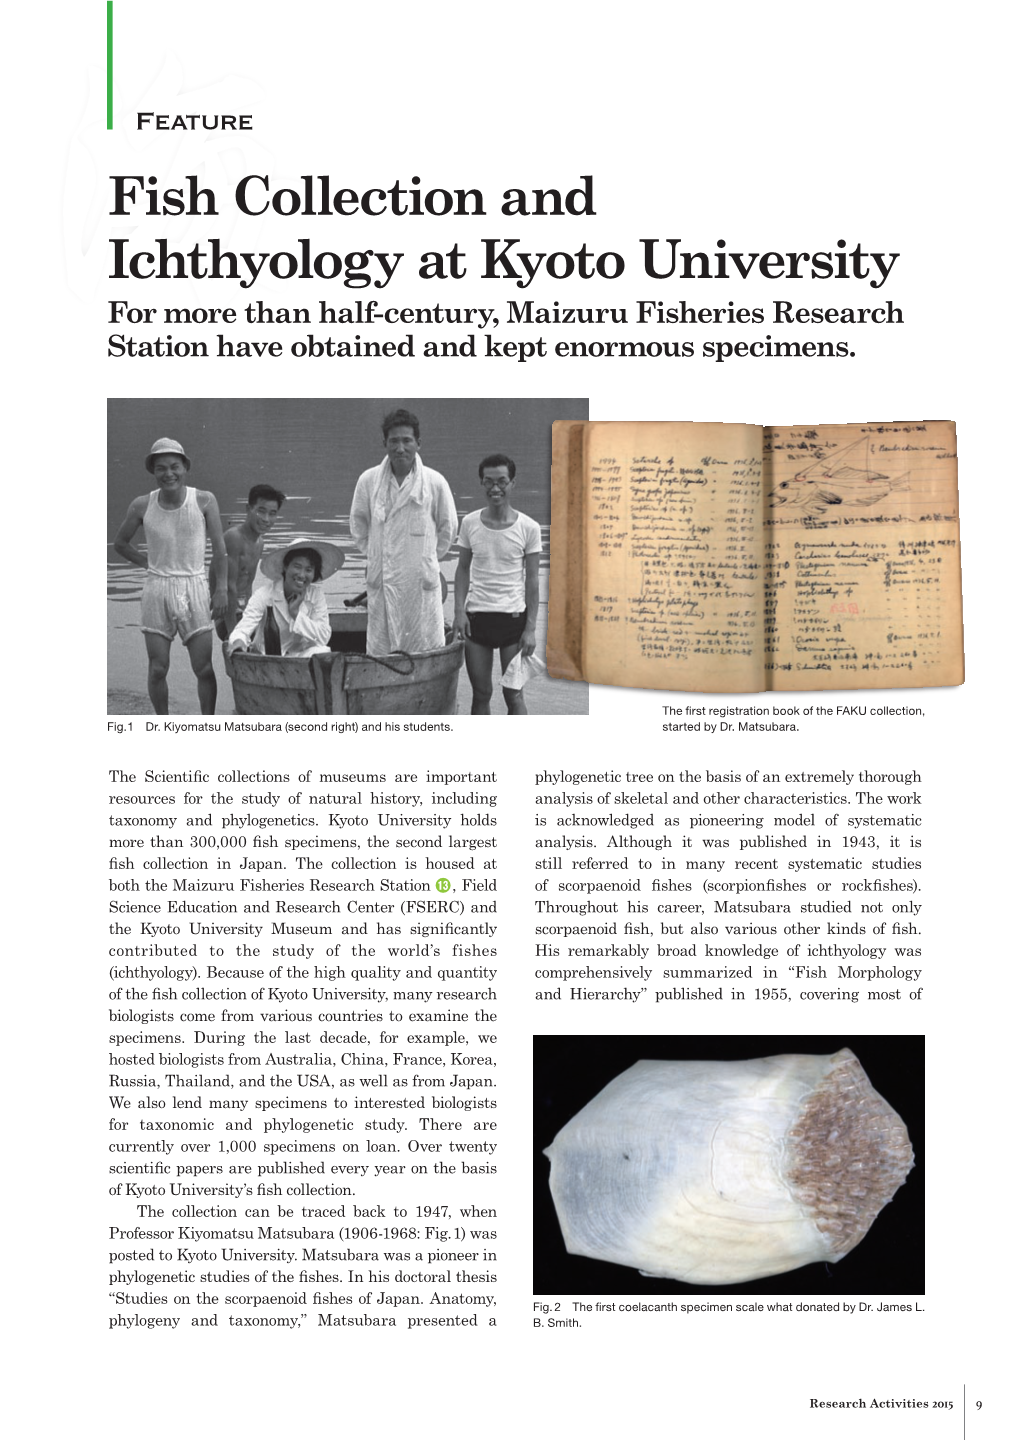 Fish Collection and Ichthyology at Kyoto University 海for More Than Half-Century, Maizuru Fisheries Research Station Have Obtained and Kept Enormous Specimens